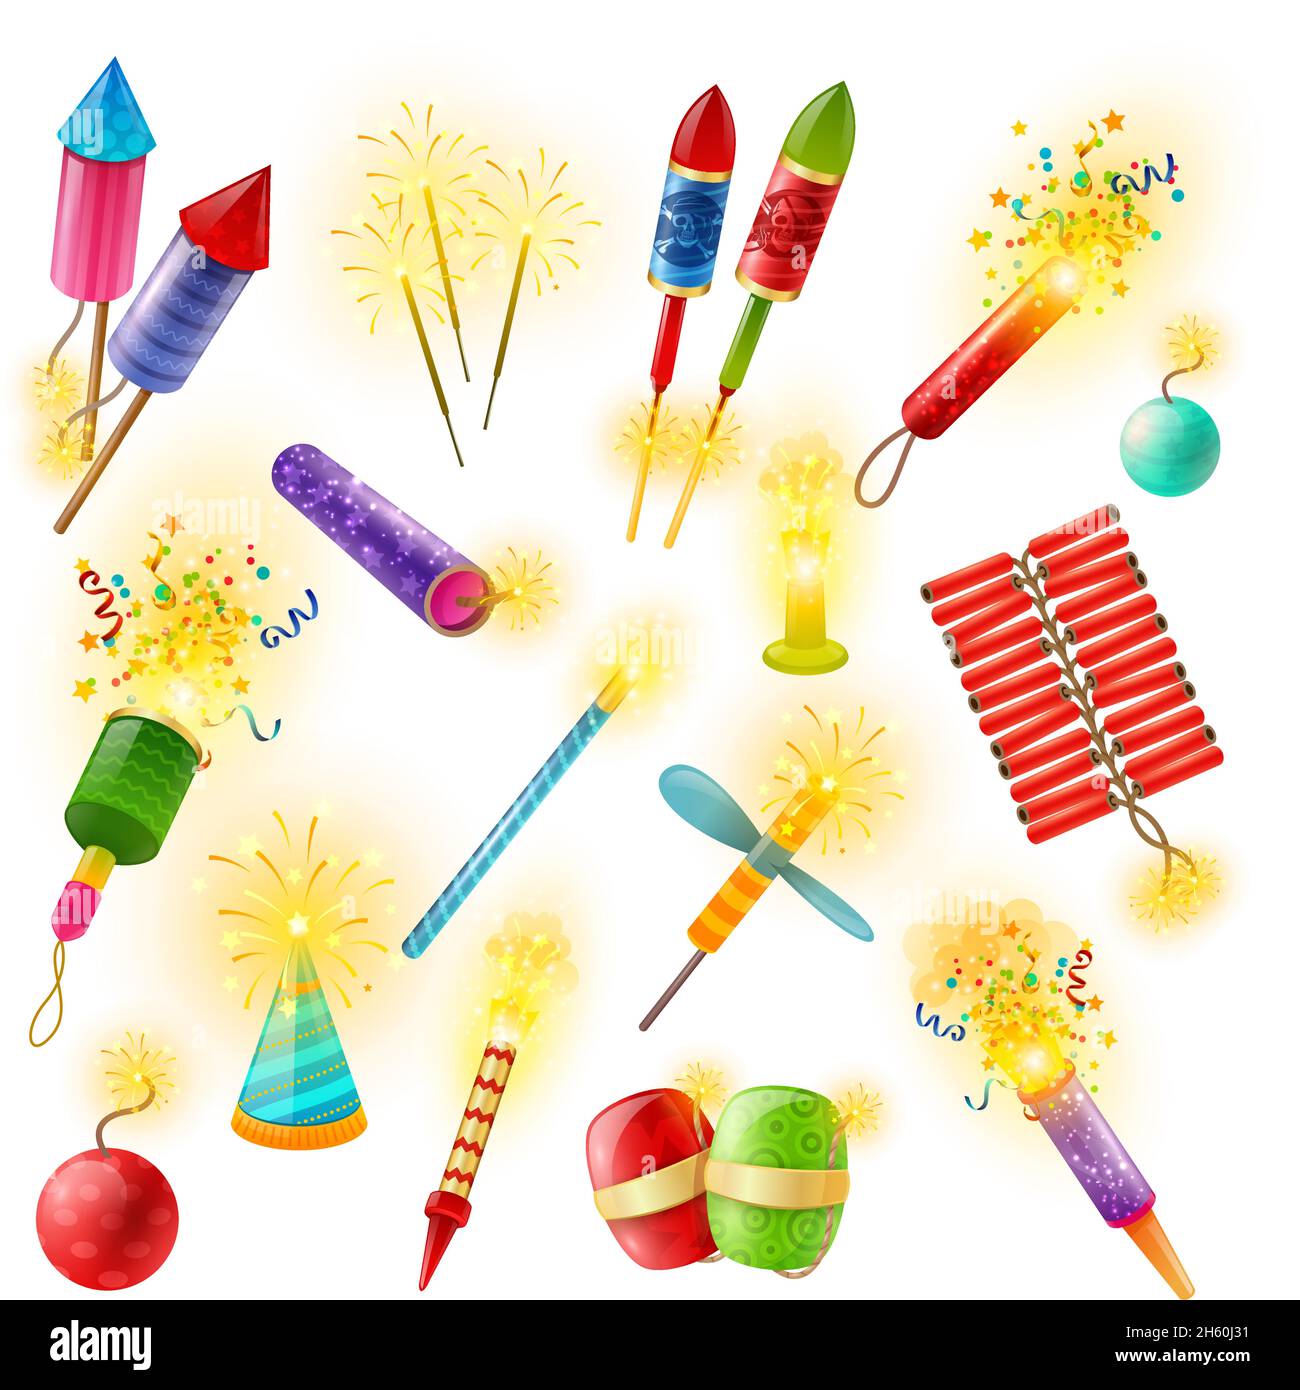 Pyrotechnics commercial firework crackers firecrackers indian bengal lights and sparklers for special events colorful collection vector illustration Stock Vector